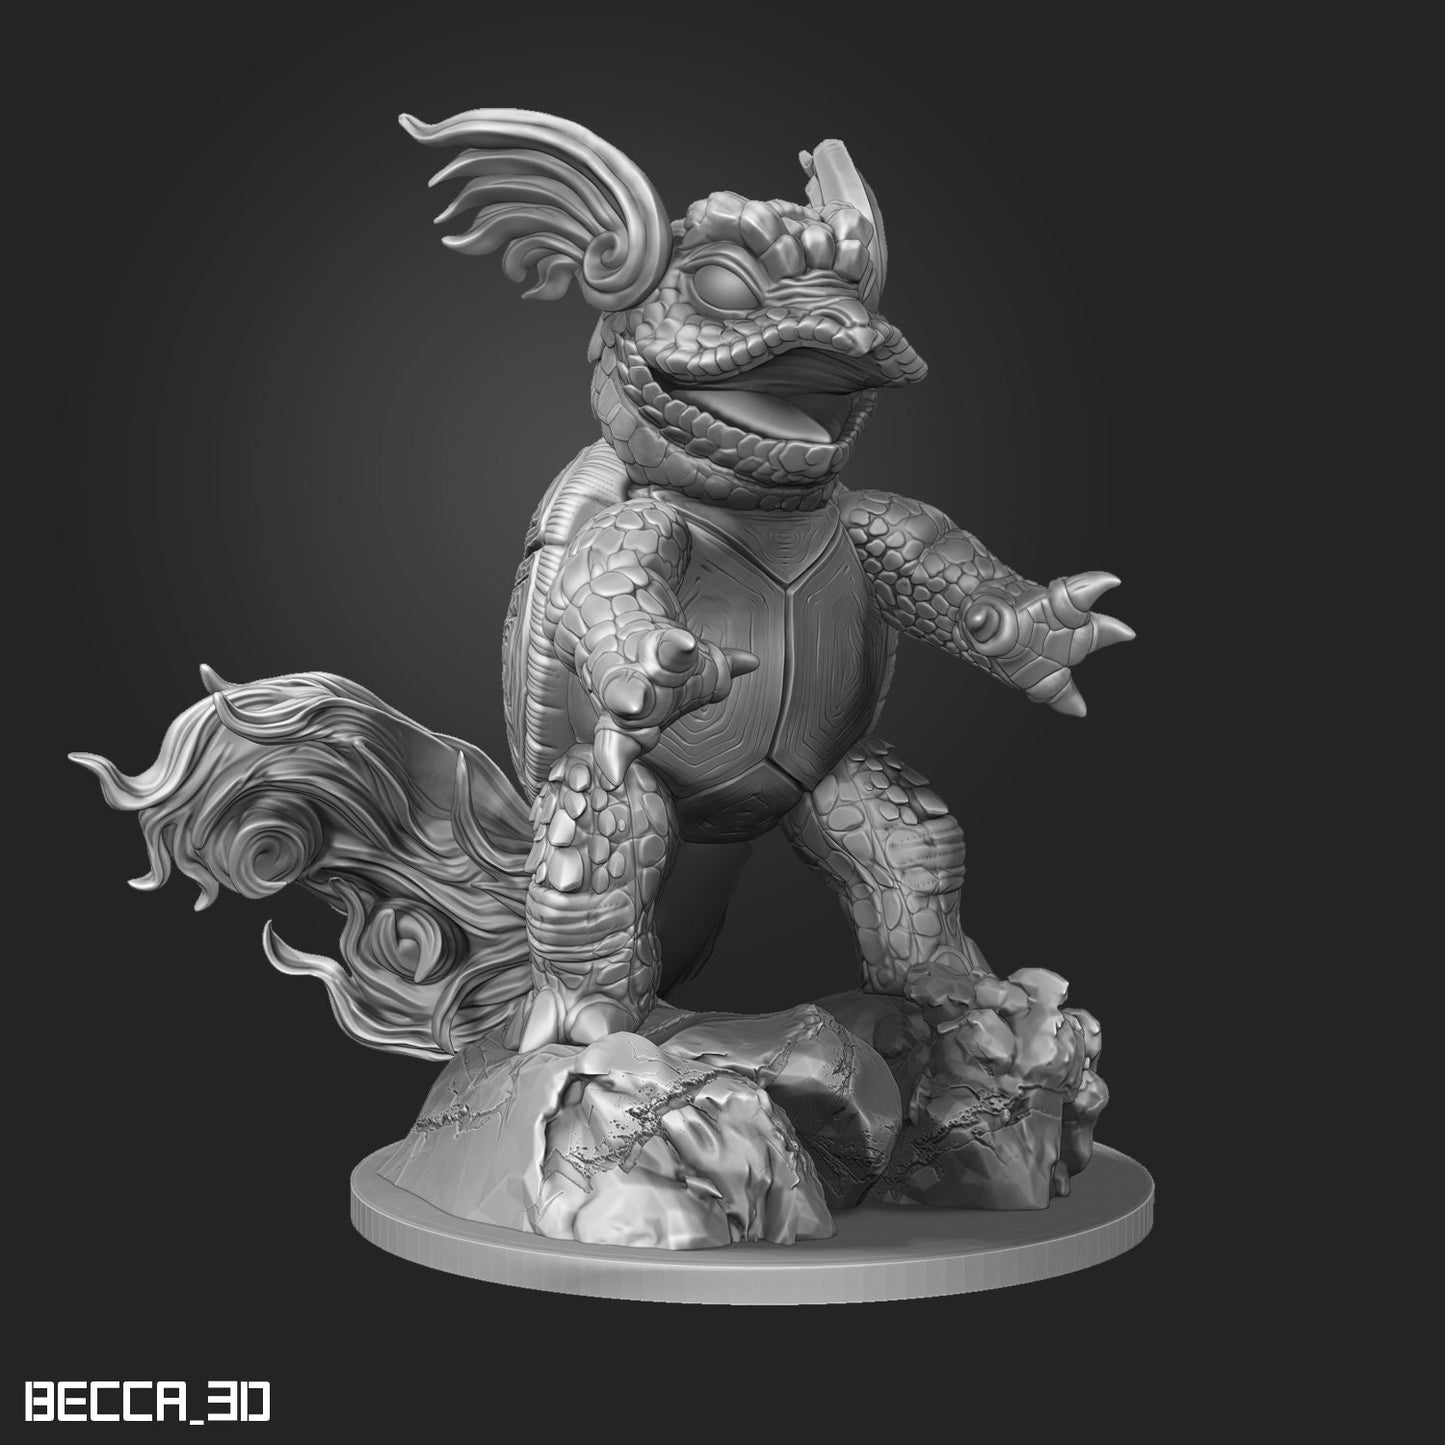 Water Turtle (sculpted by Kaijumon)